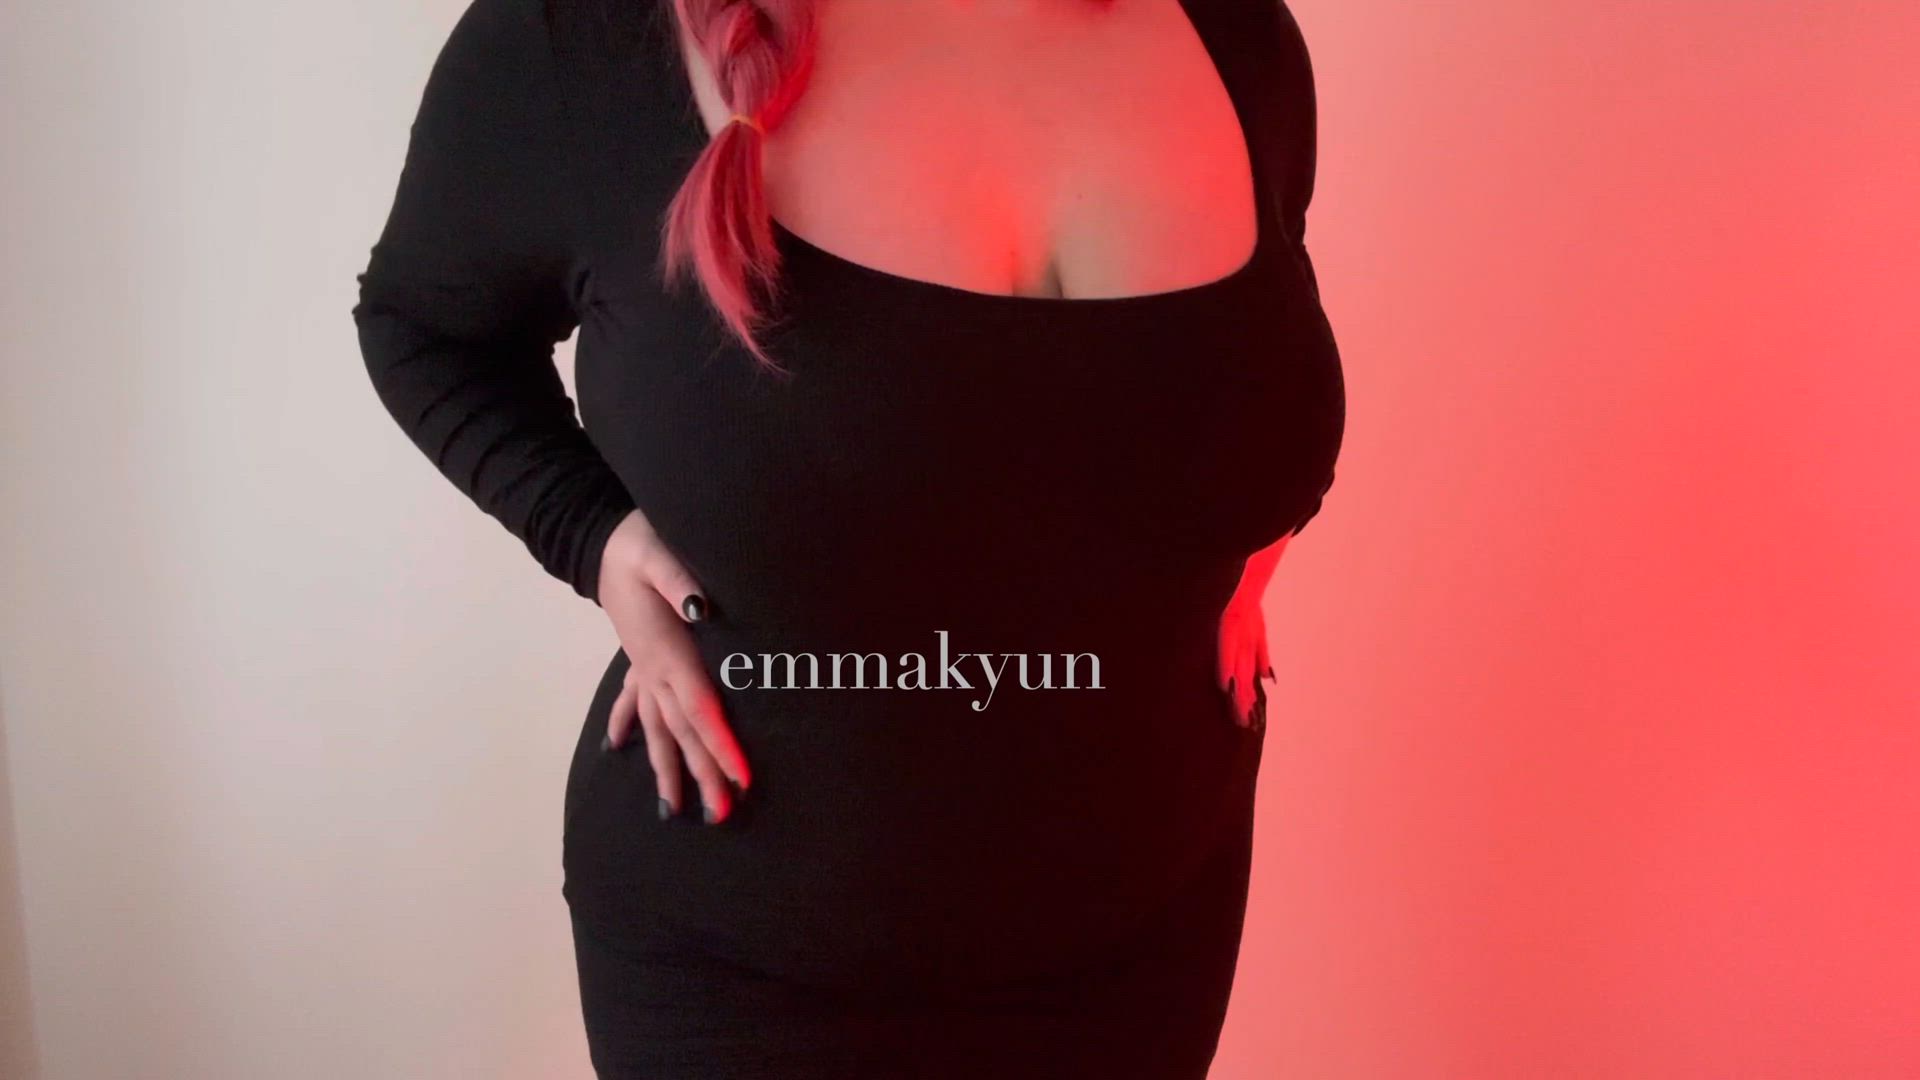 Cosplay porn video with onlyfans model emmakyun <strong>@emmakyun</strong>